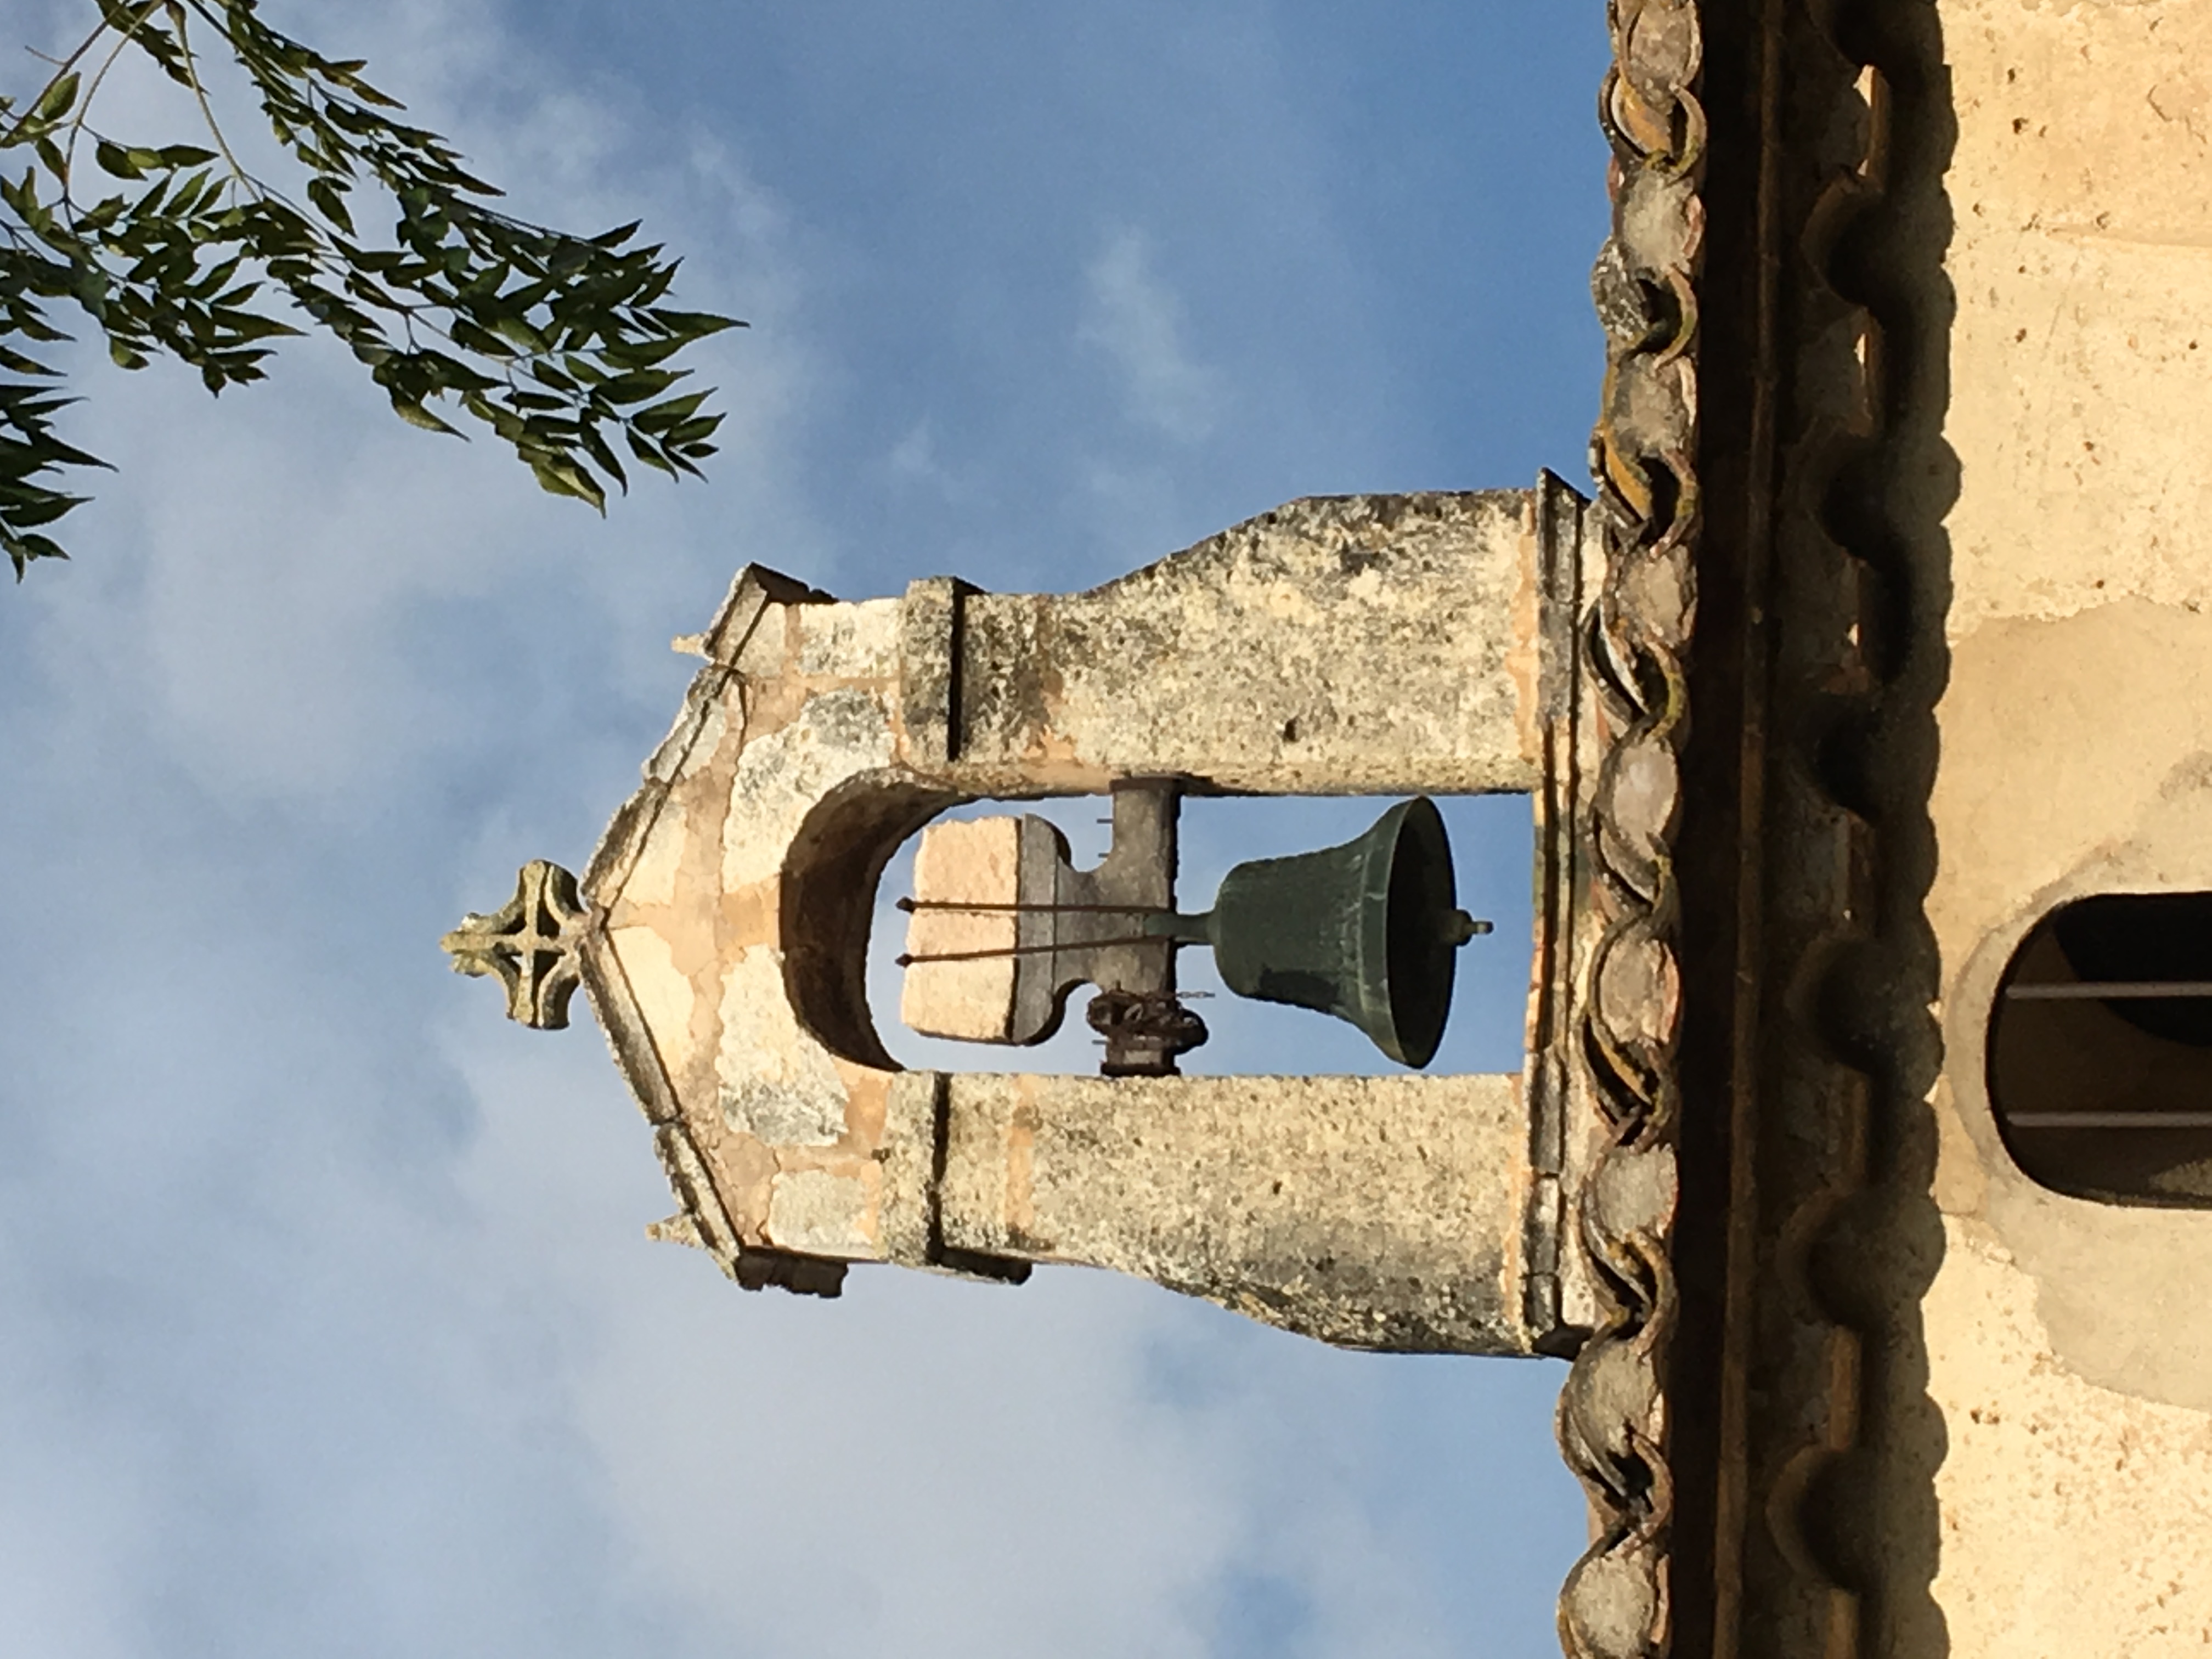 A church bell and steeple